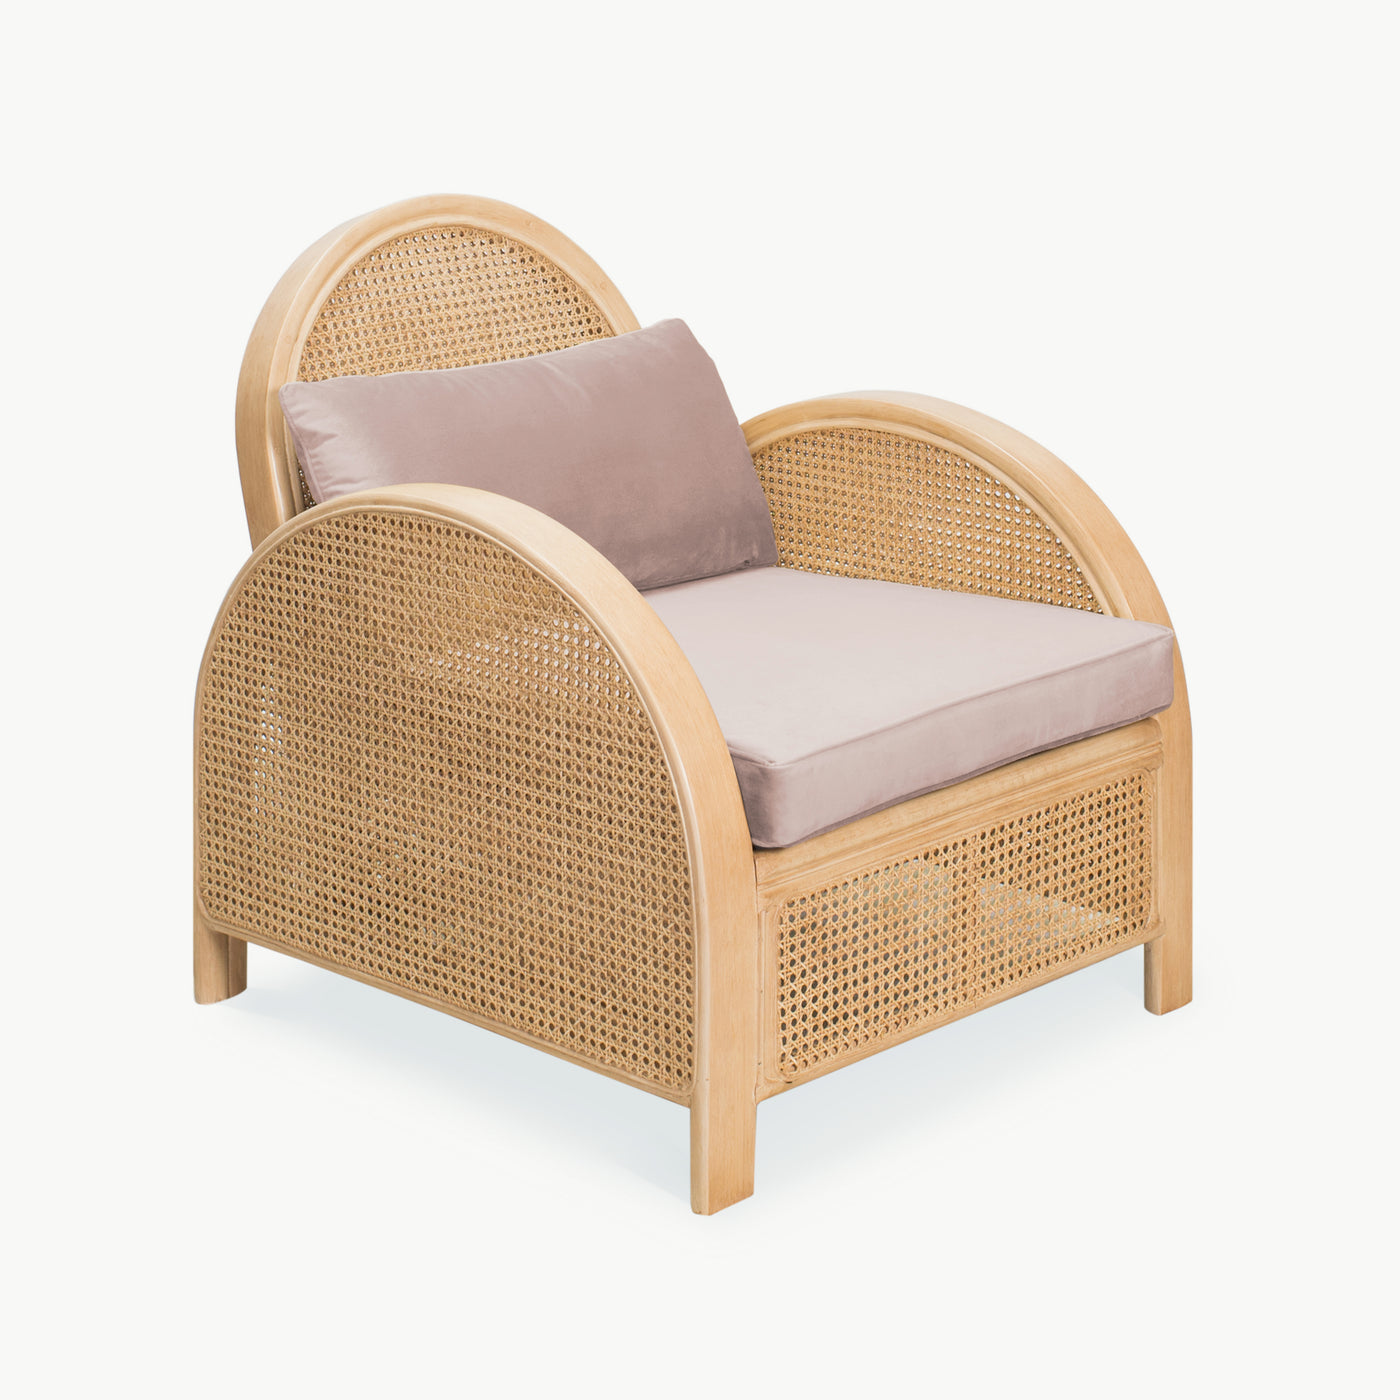 THE BOTANIST Cane Chair - Dusty Pink